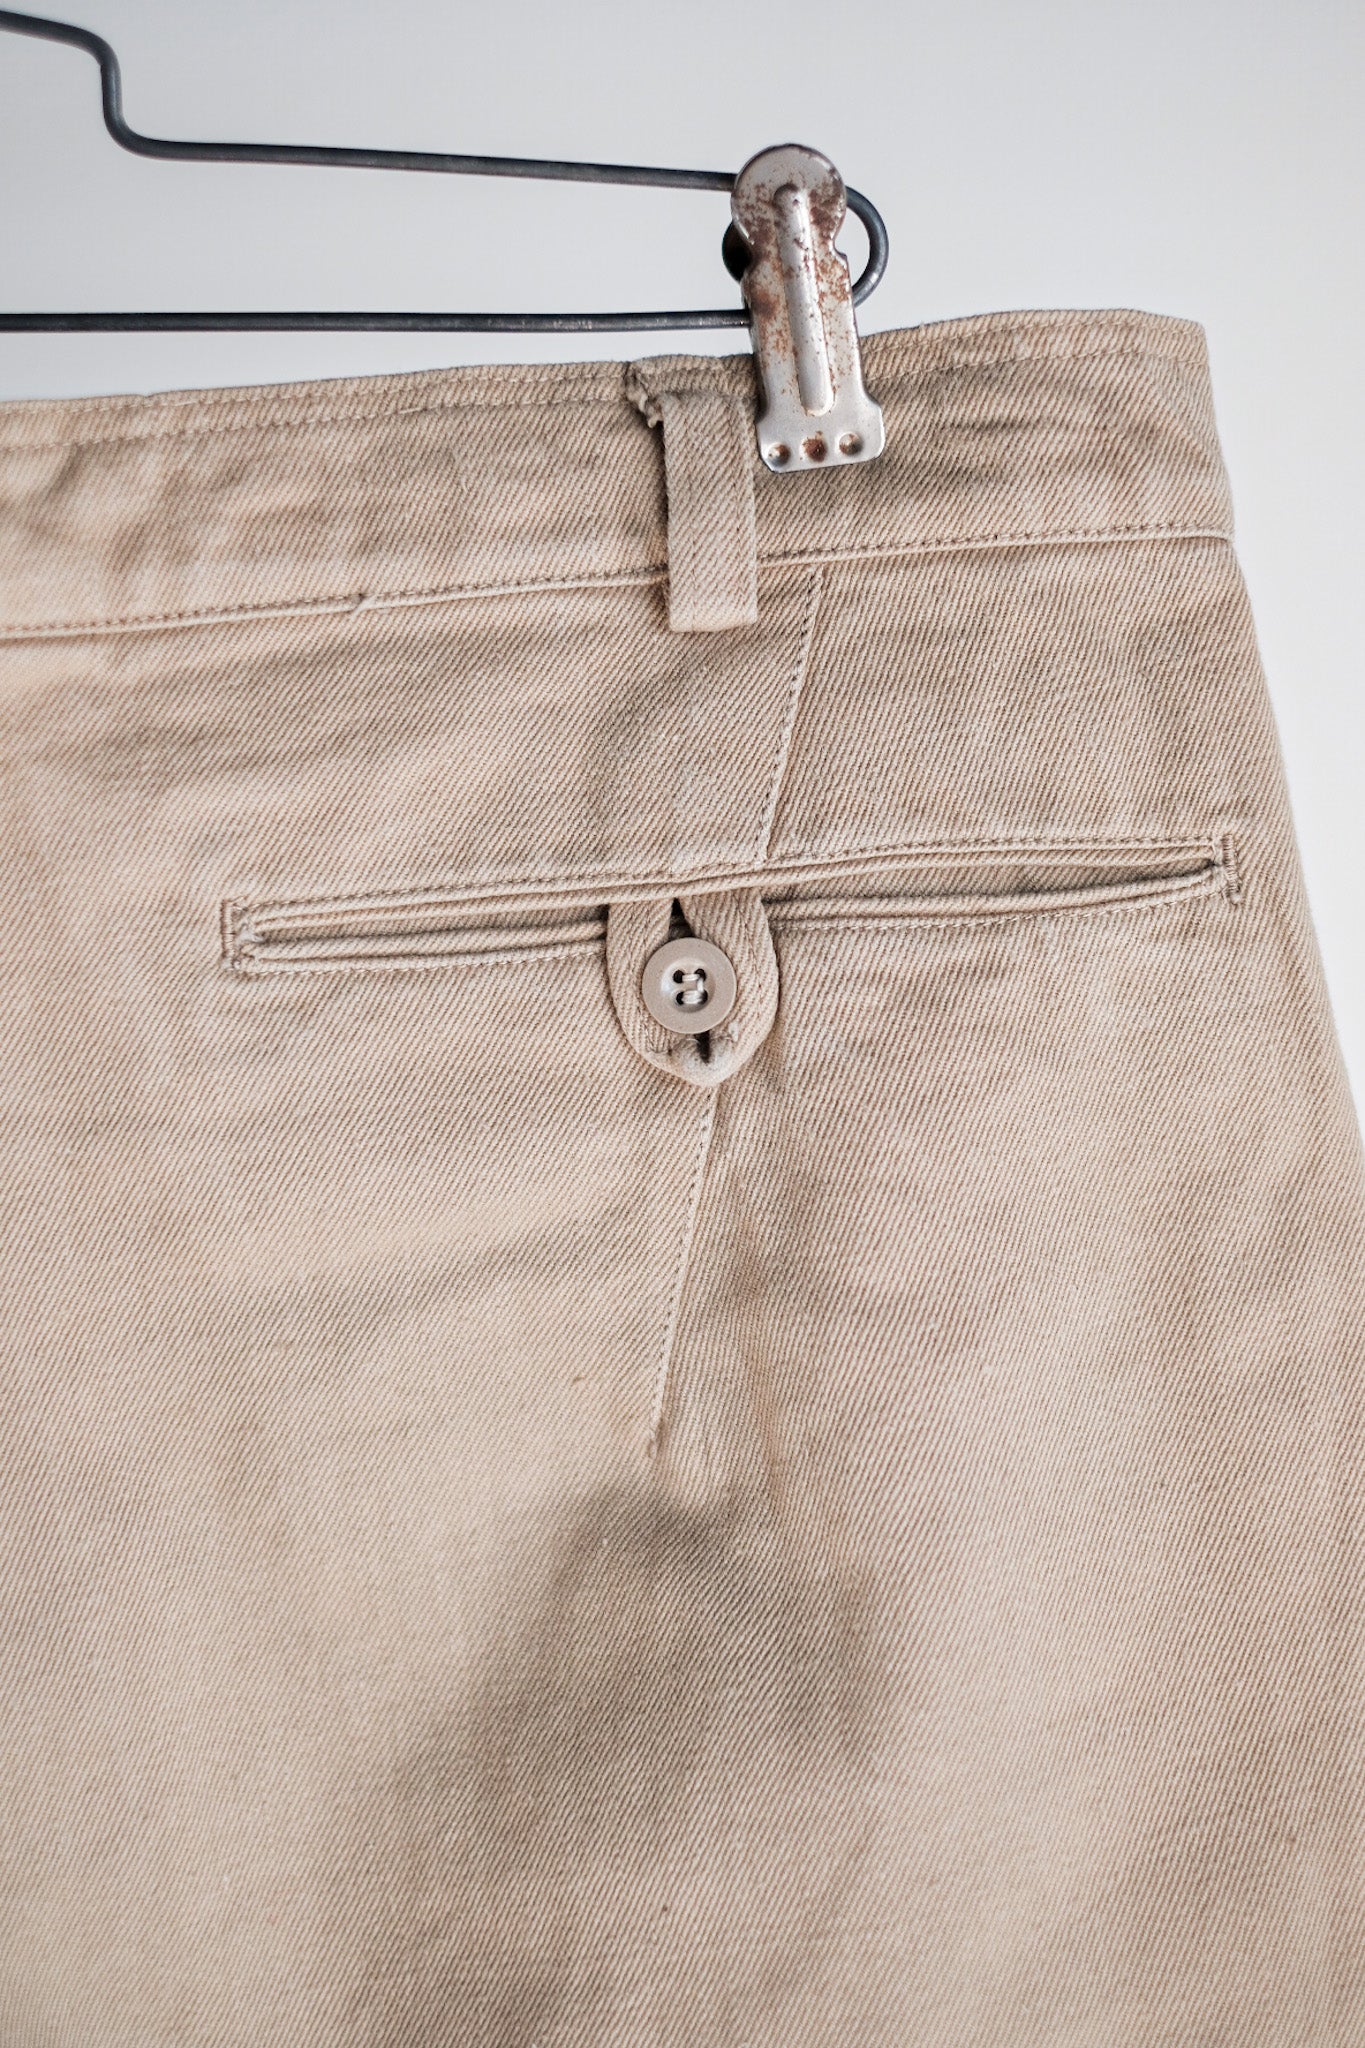 [~ 50's] French Army M52 Chino Taille des pantalons.84M